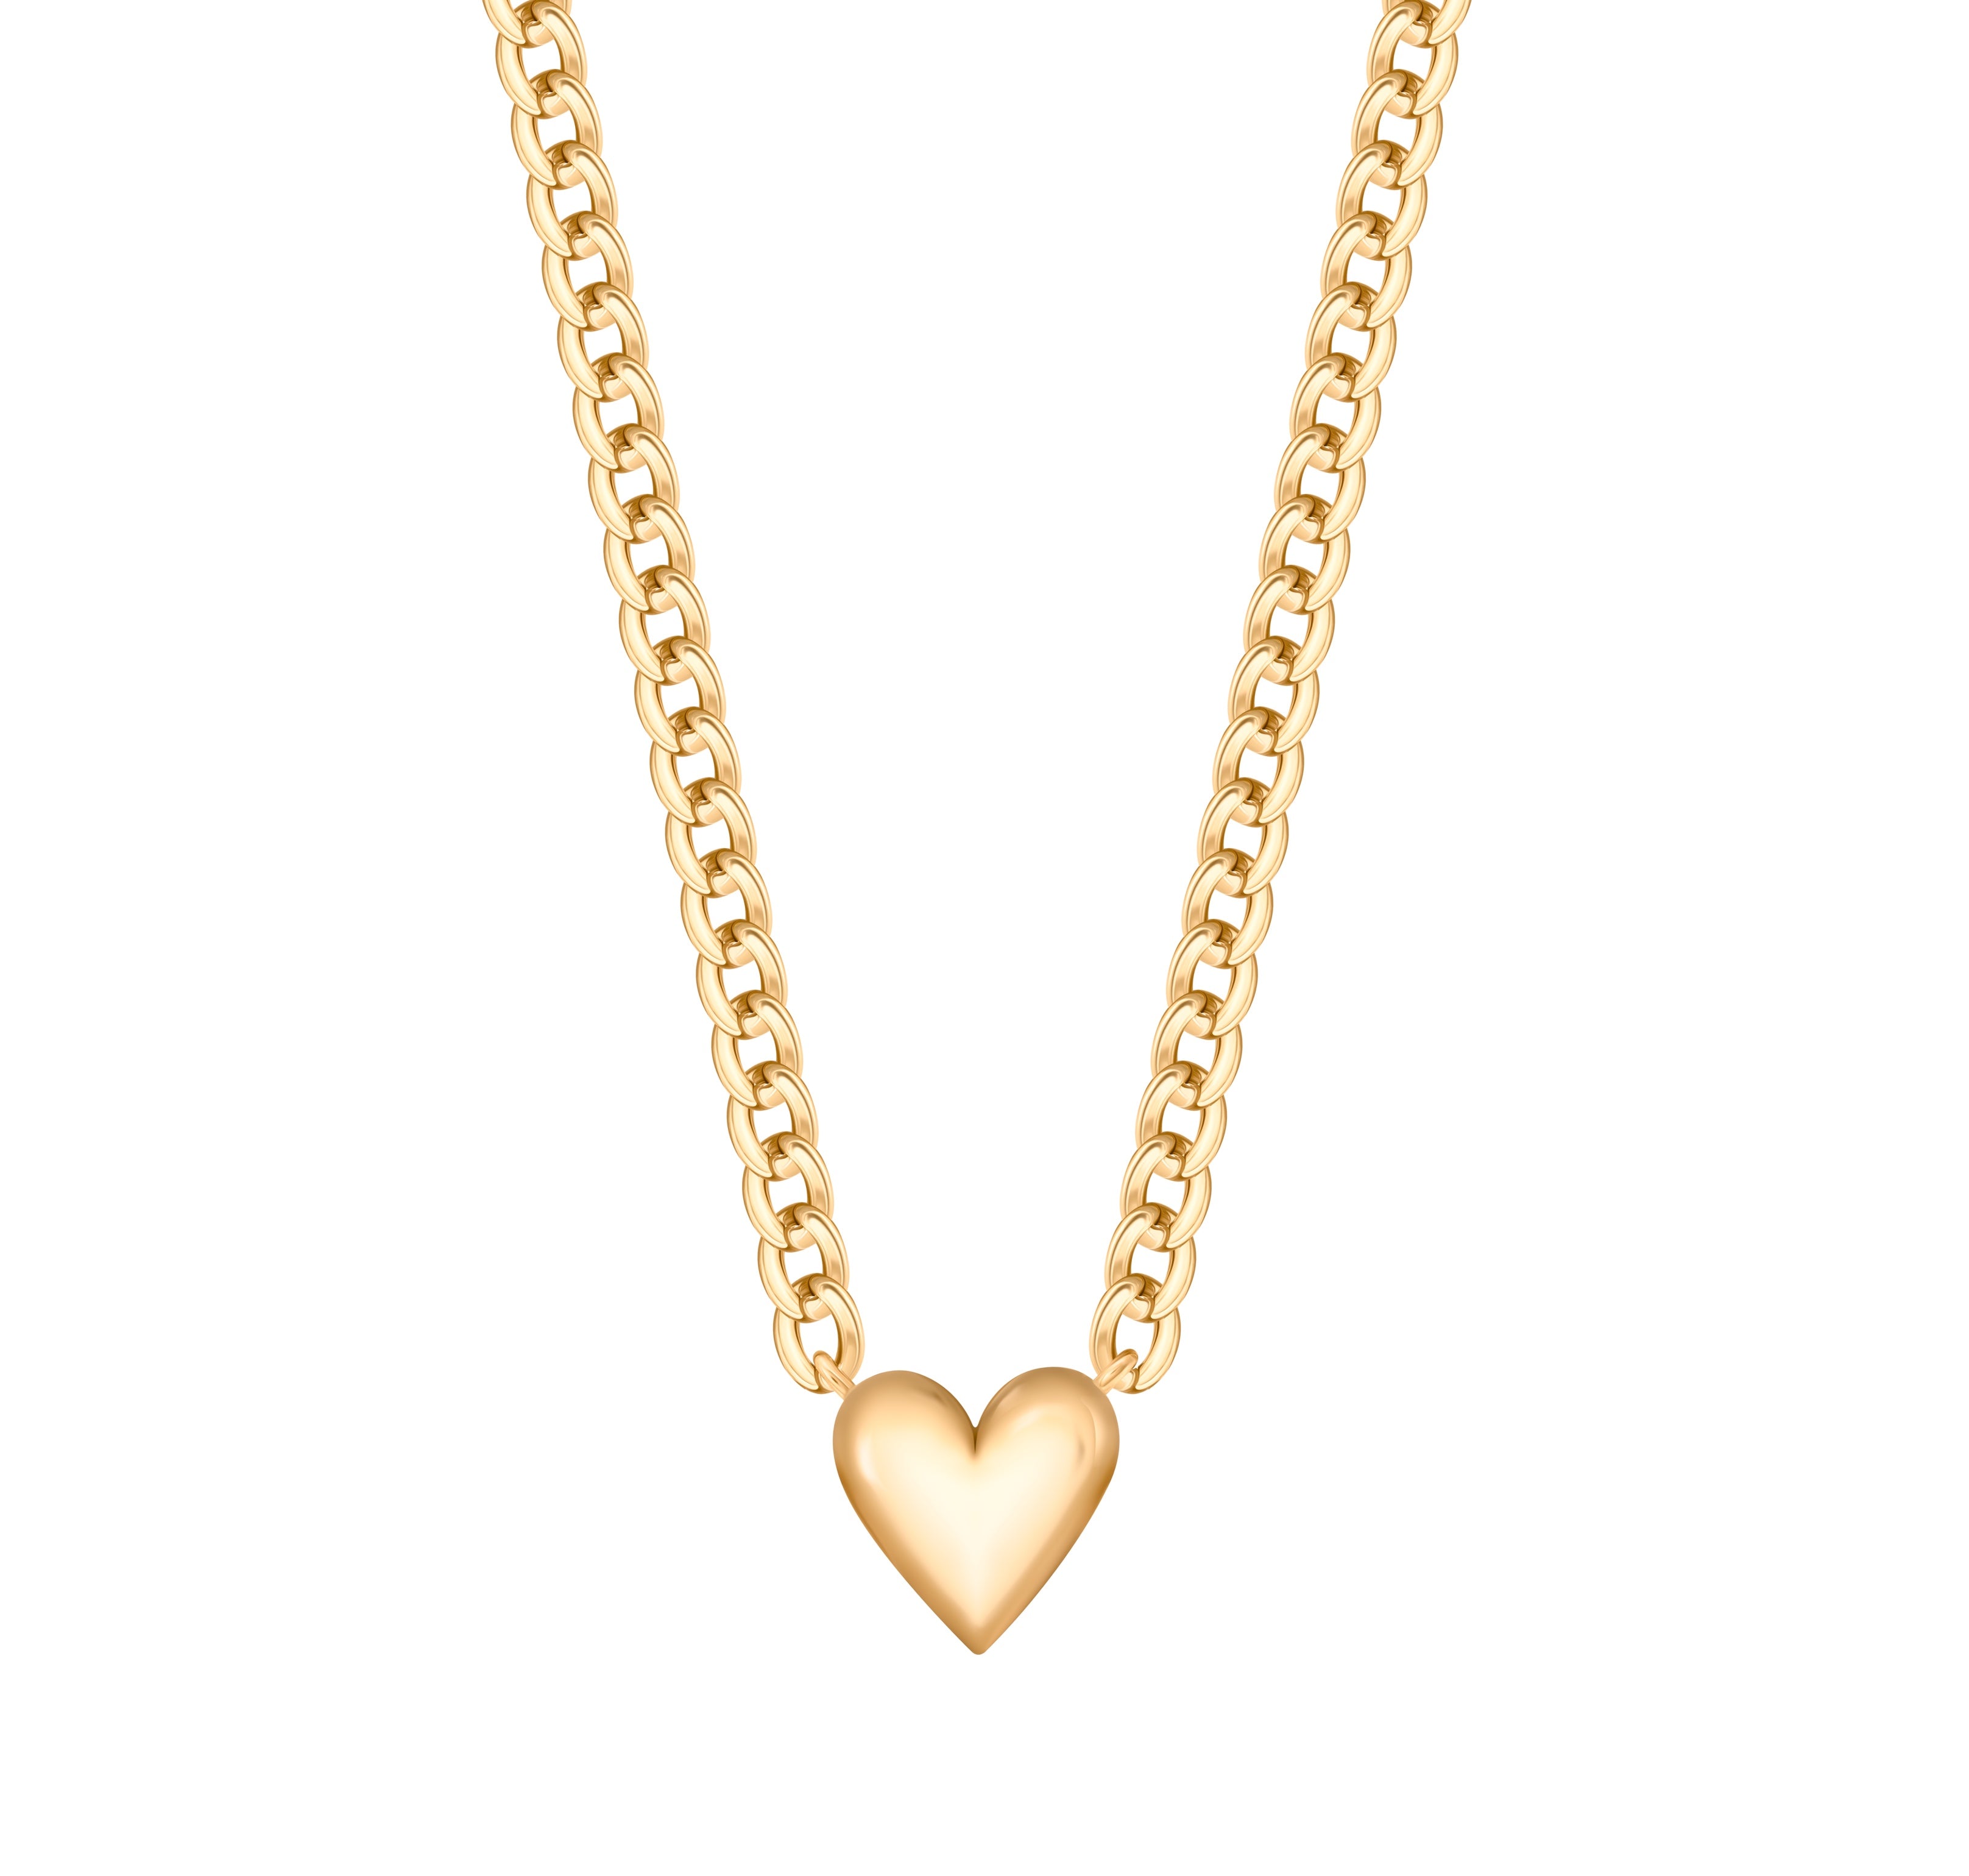 Puffy Heart Cuban Link Chain Necklace